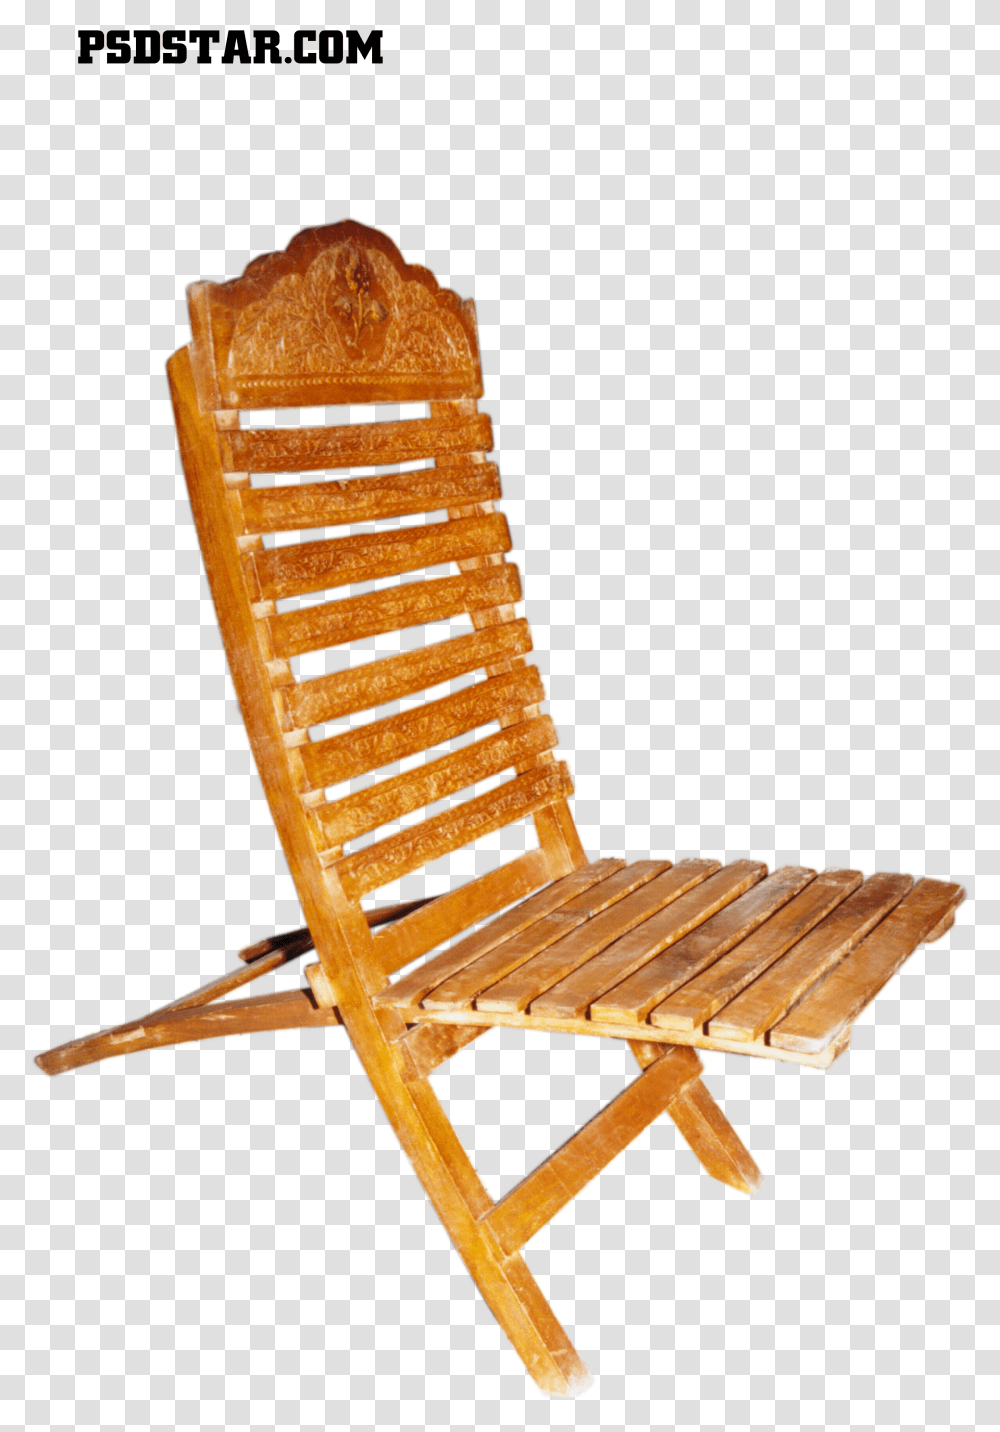 Folding Chair Hd Images For Photoshop Transparent Png